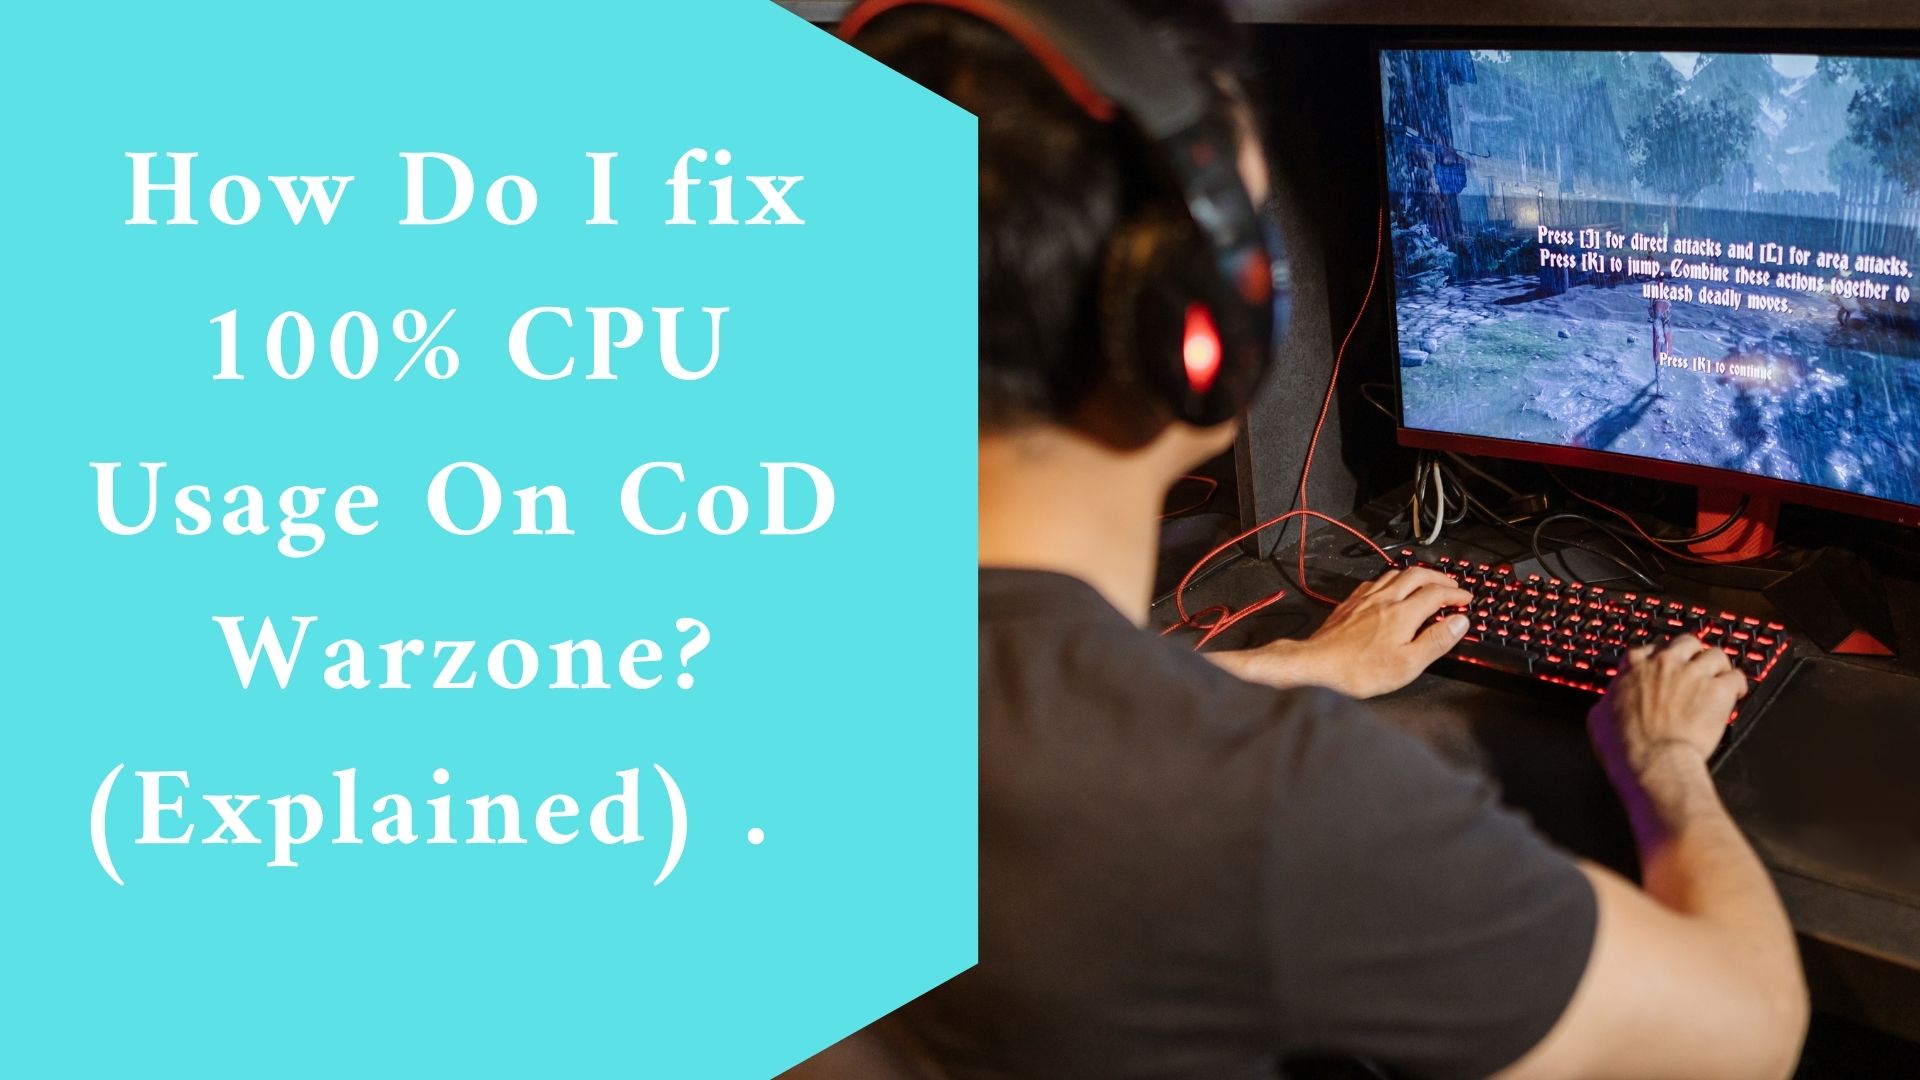 How Do I fix 100% CPU Usage On CoD Warzone? (Explained)